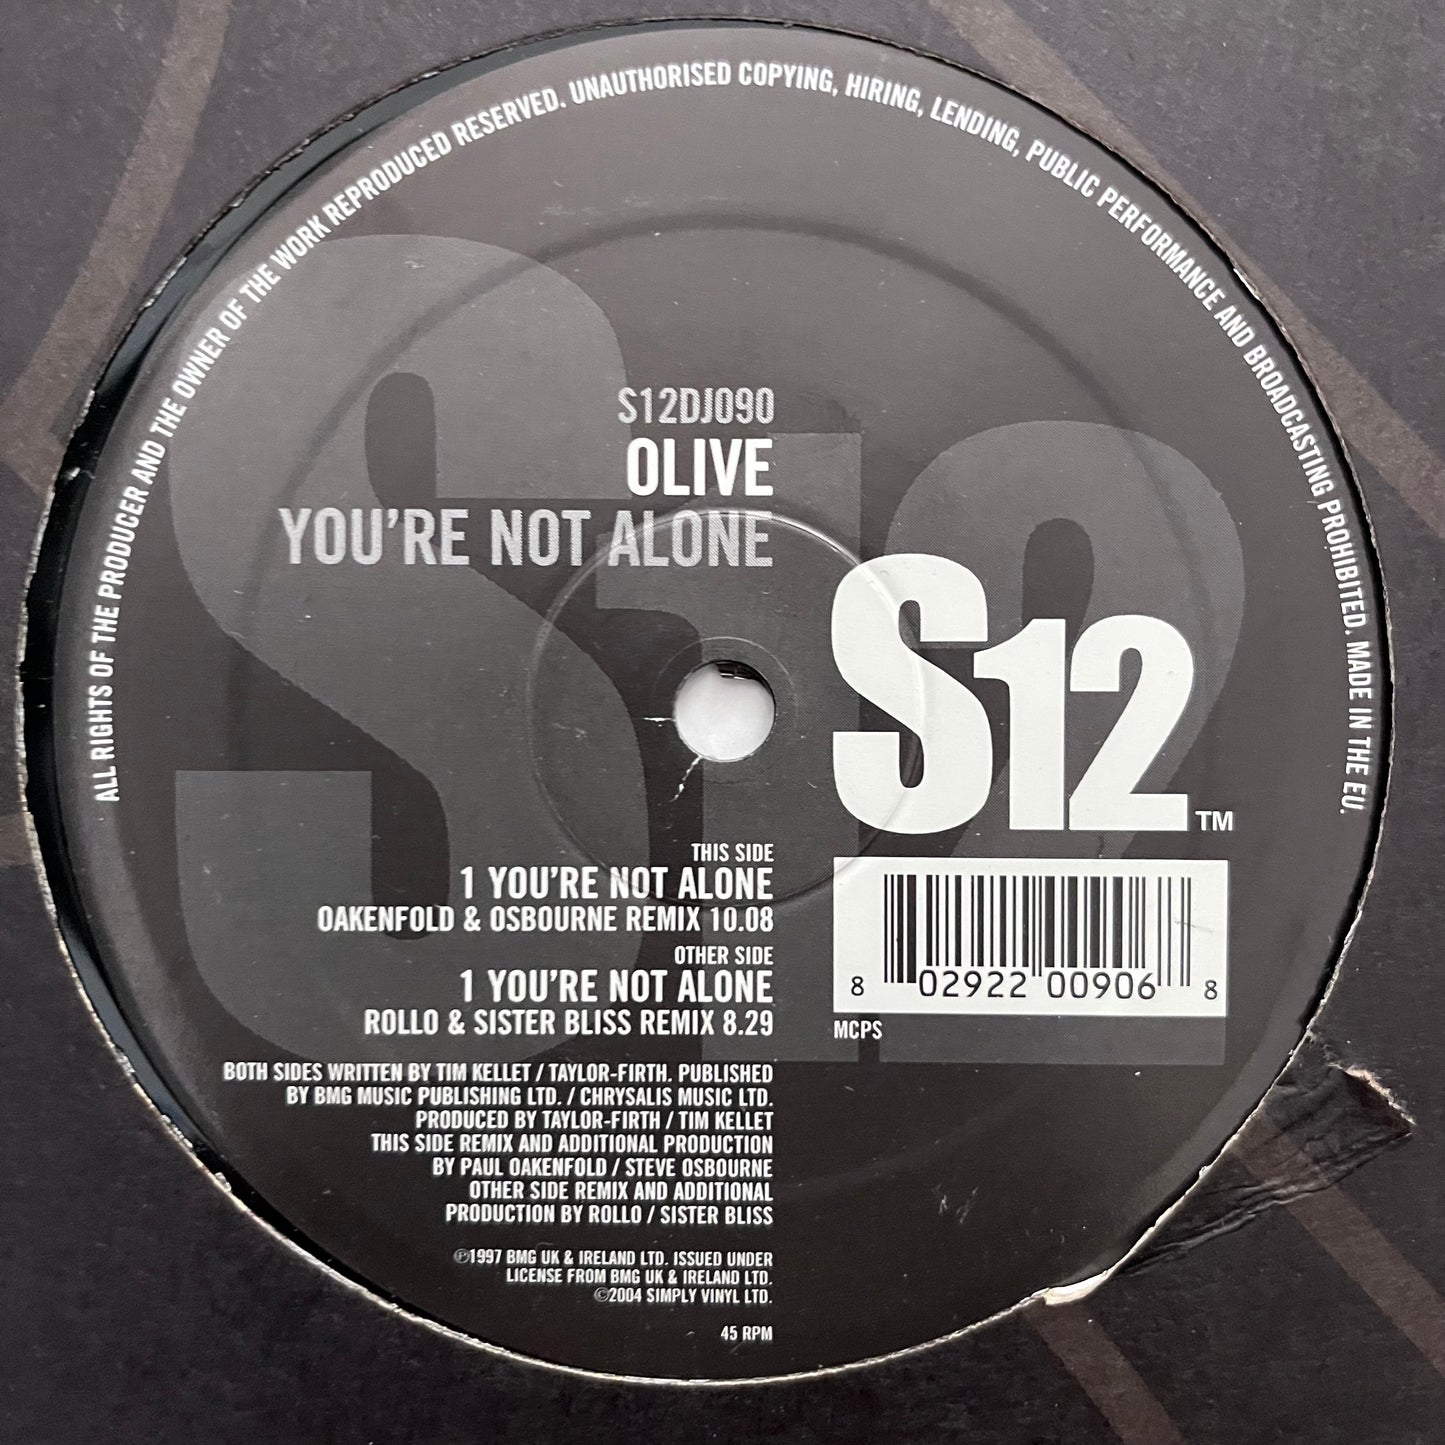 Olive “You’re Not Alone” 2 Version 12inch Vinyl Record includes Oakenfold and Rollo Mixes